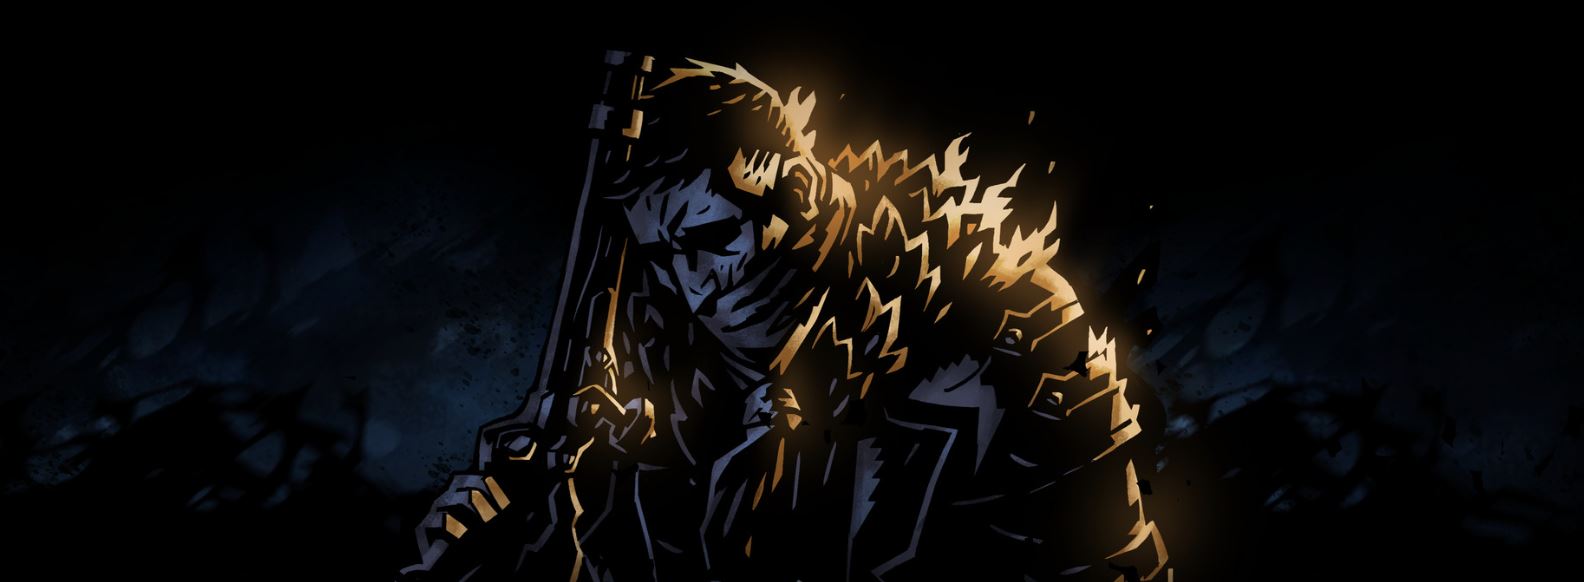 Darkest Dungeon 2: Best Team Comps For the Early and Late Game